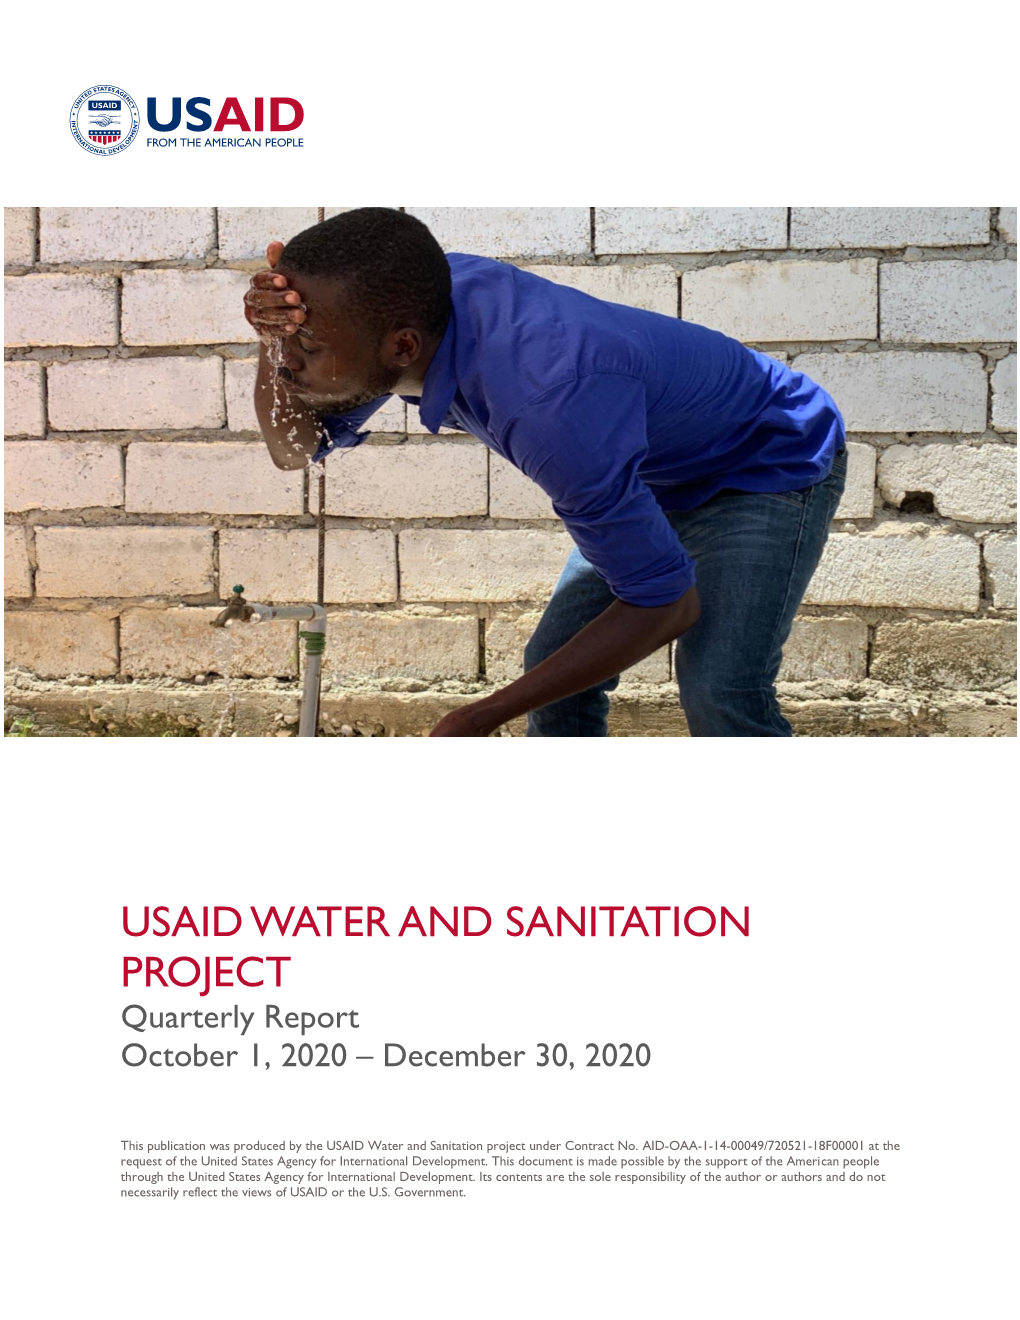 USAID WATER and SANITATION PROJECT Quarterly Report October 1, 2020 – December 30, 2020